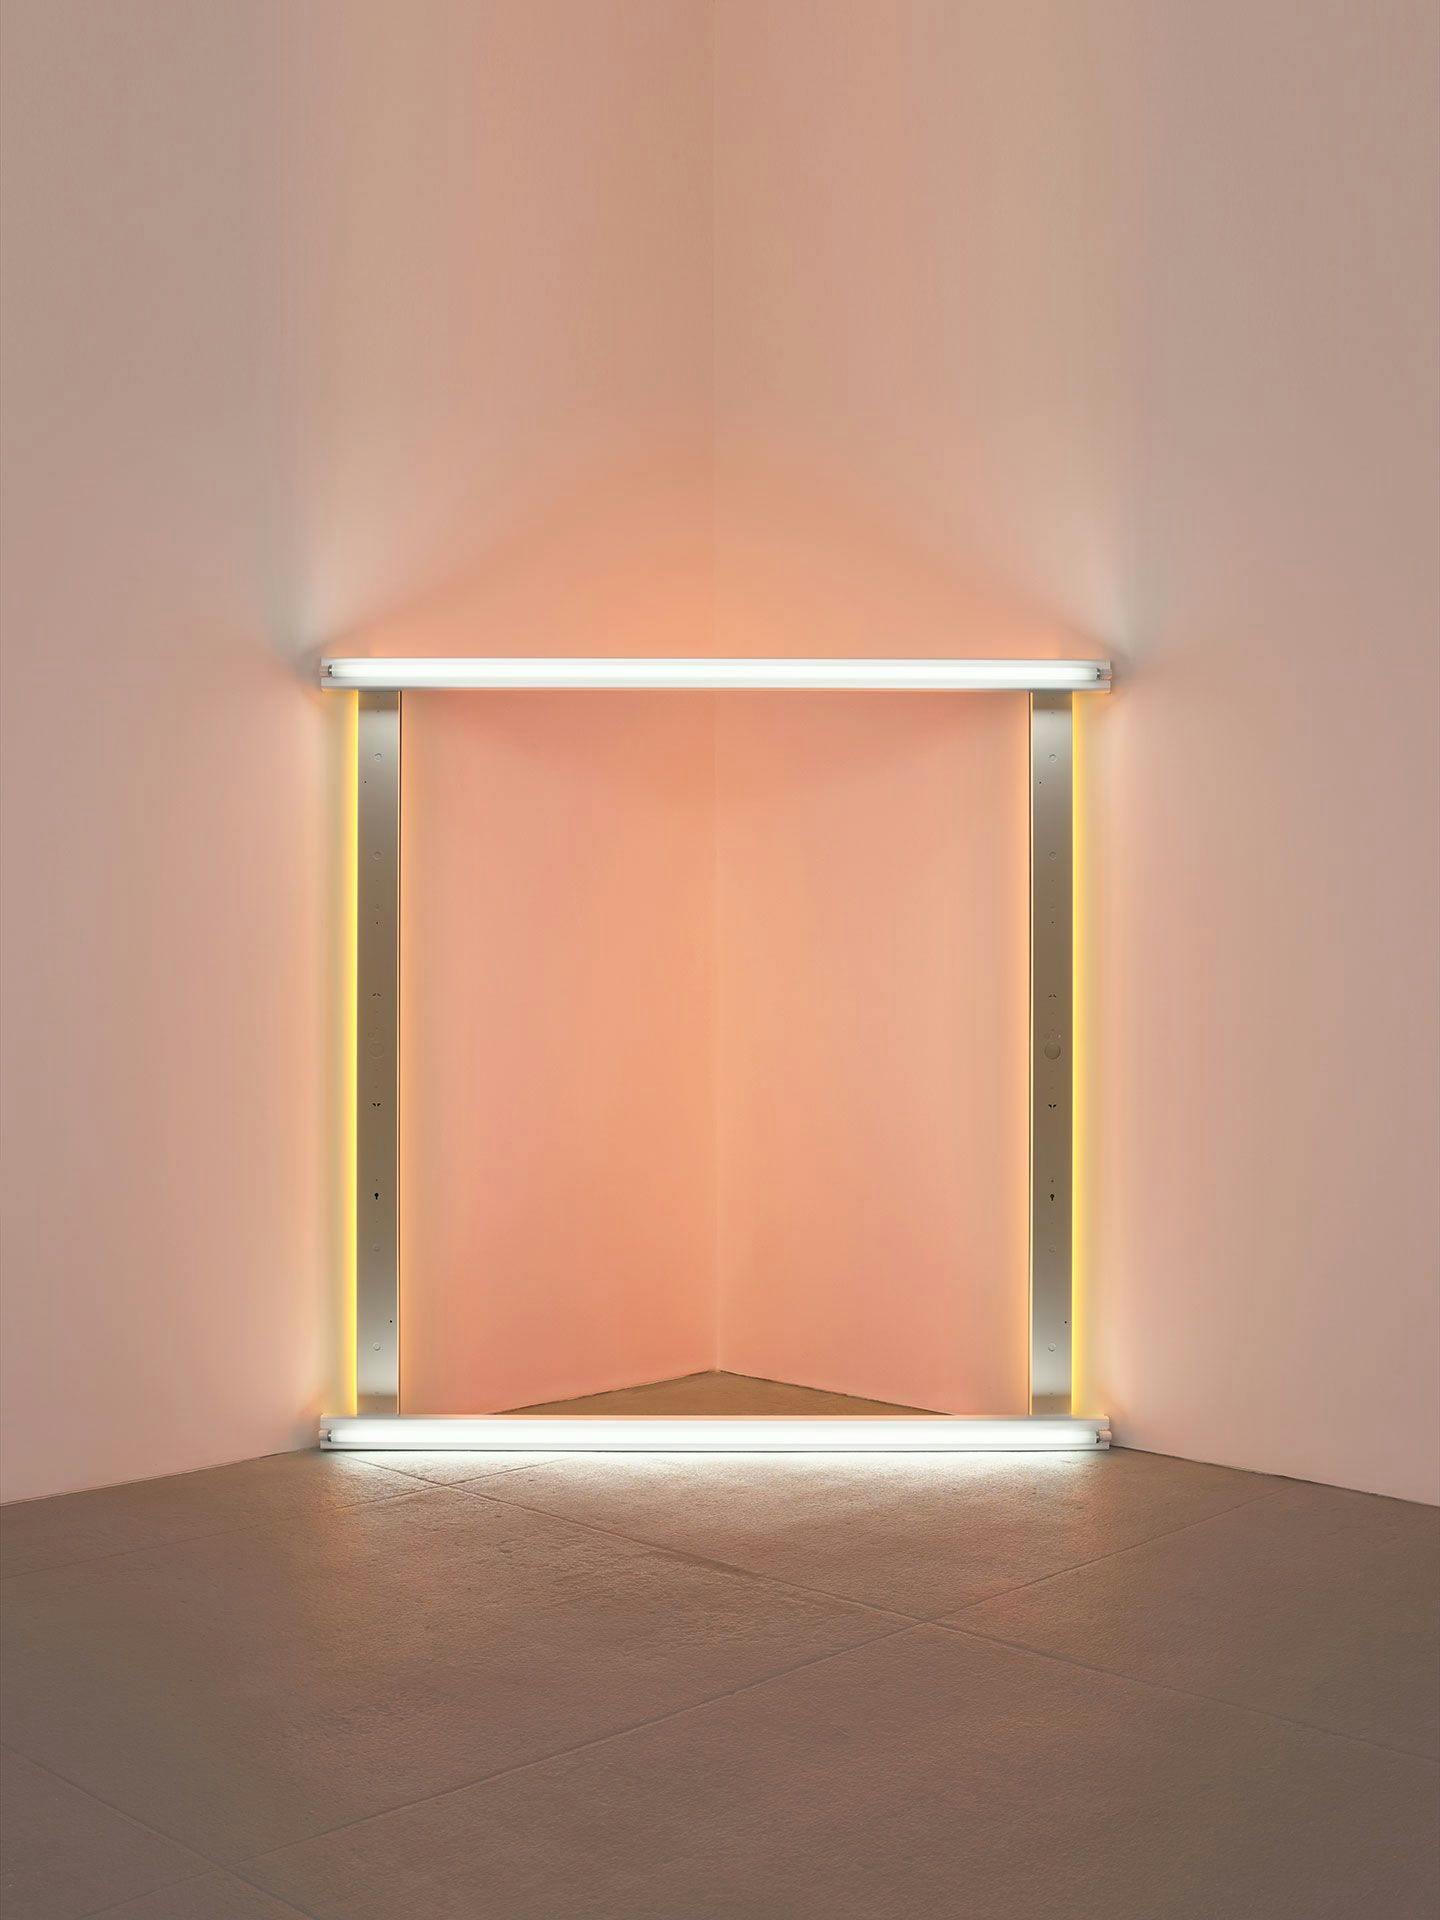 A sculpture in daylight, yellow, and pink fluorescent light by Dan Flavin, titled untitled (to the "innovator" of Wheeling Peachblow), daetd 1966 to 1968.